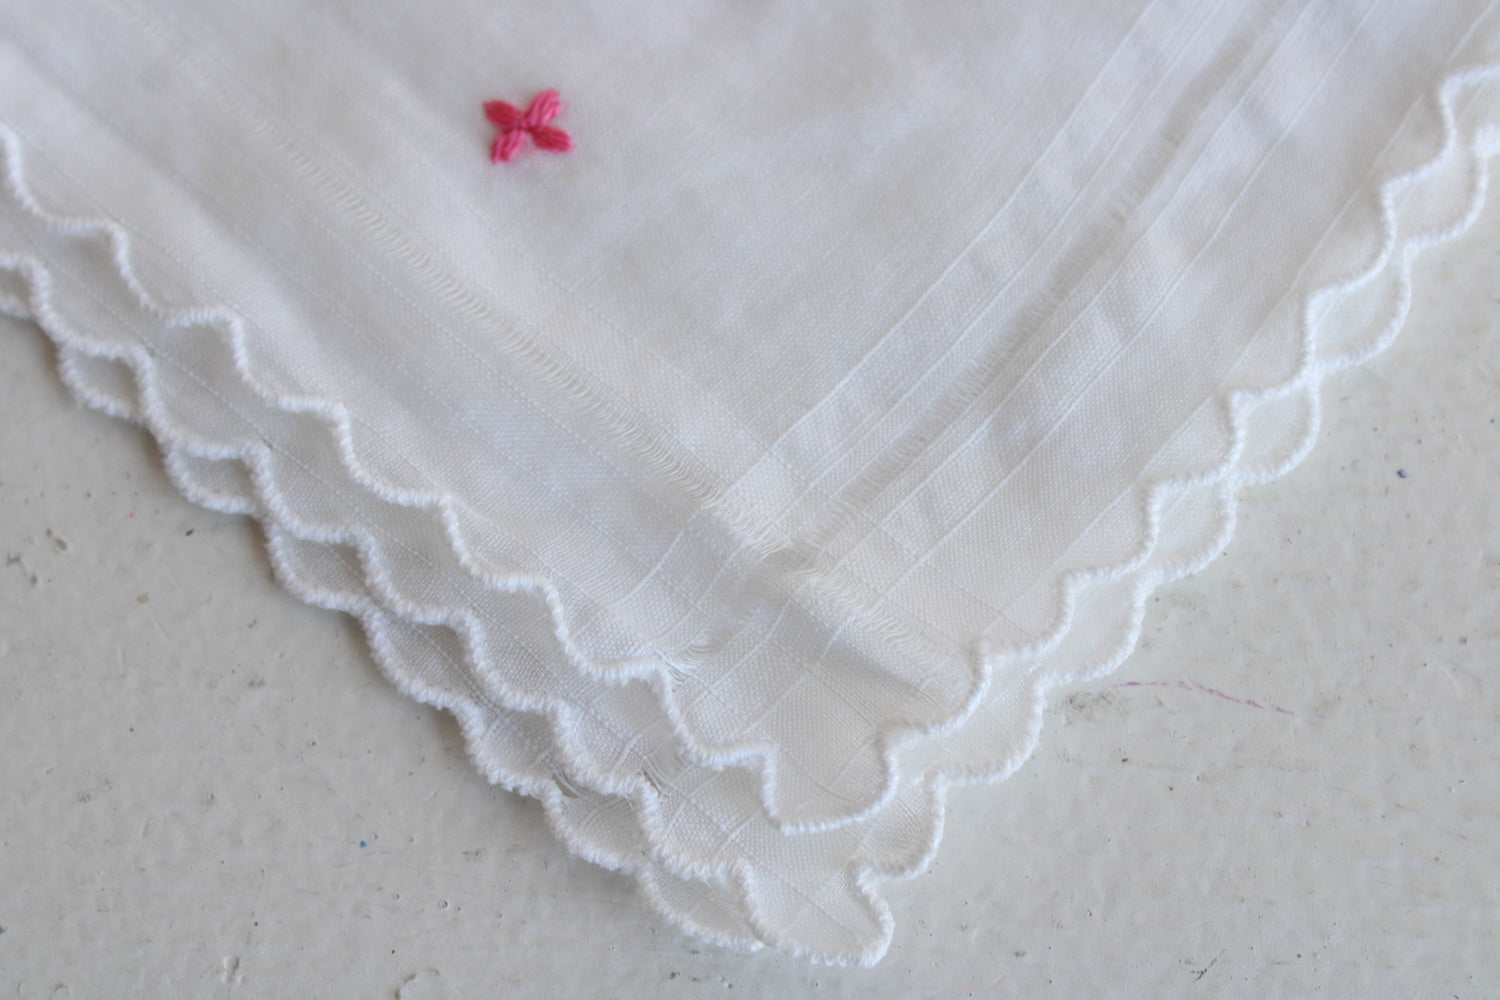 Vintage 1950s Hanky with Embroidered Pink Flowers